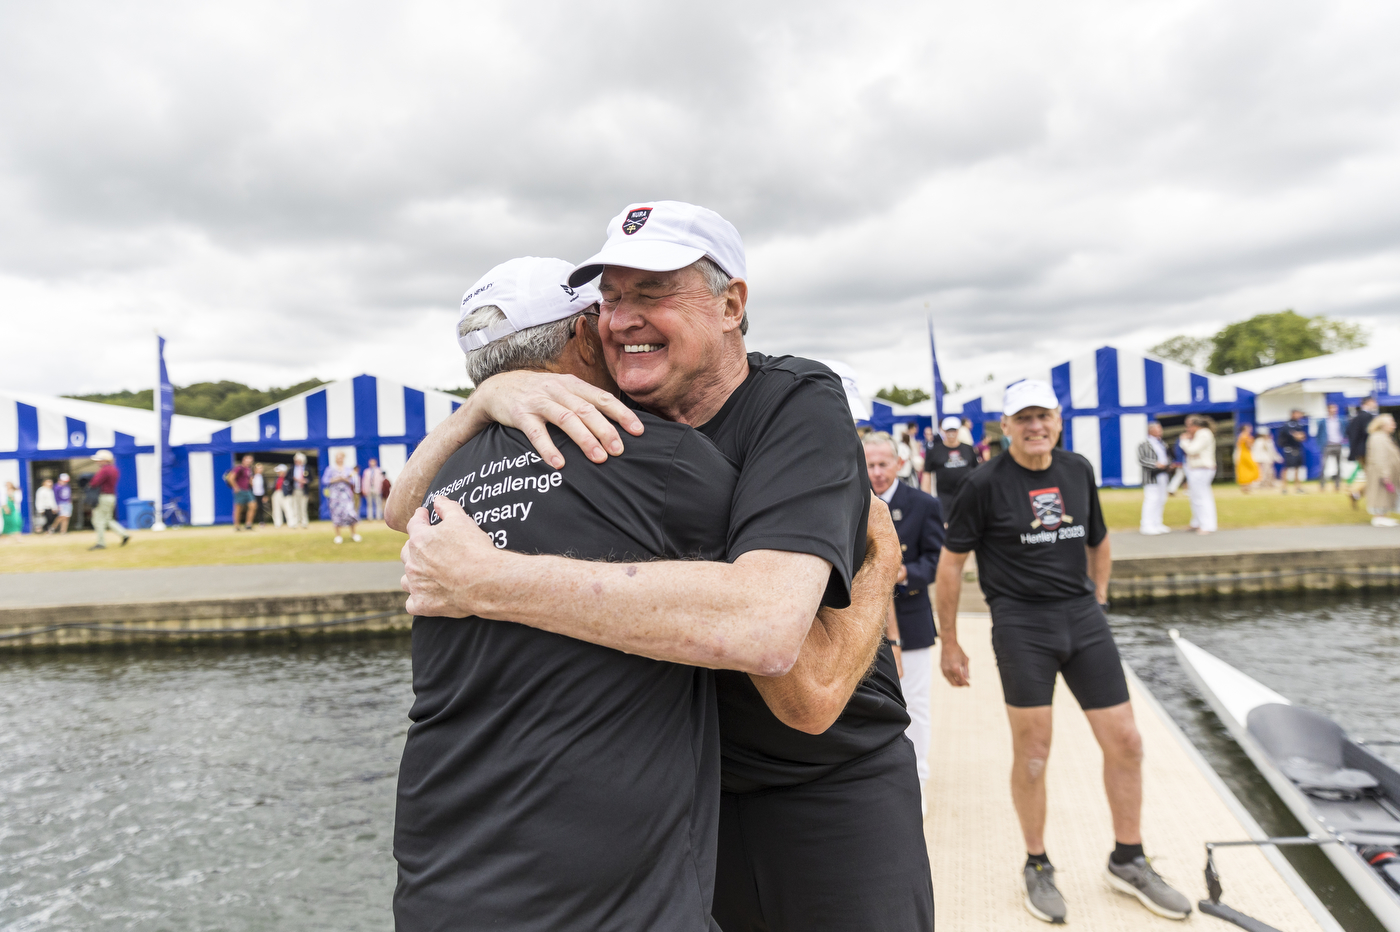 members of the 1973 crew team hugging each other